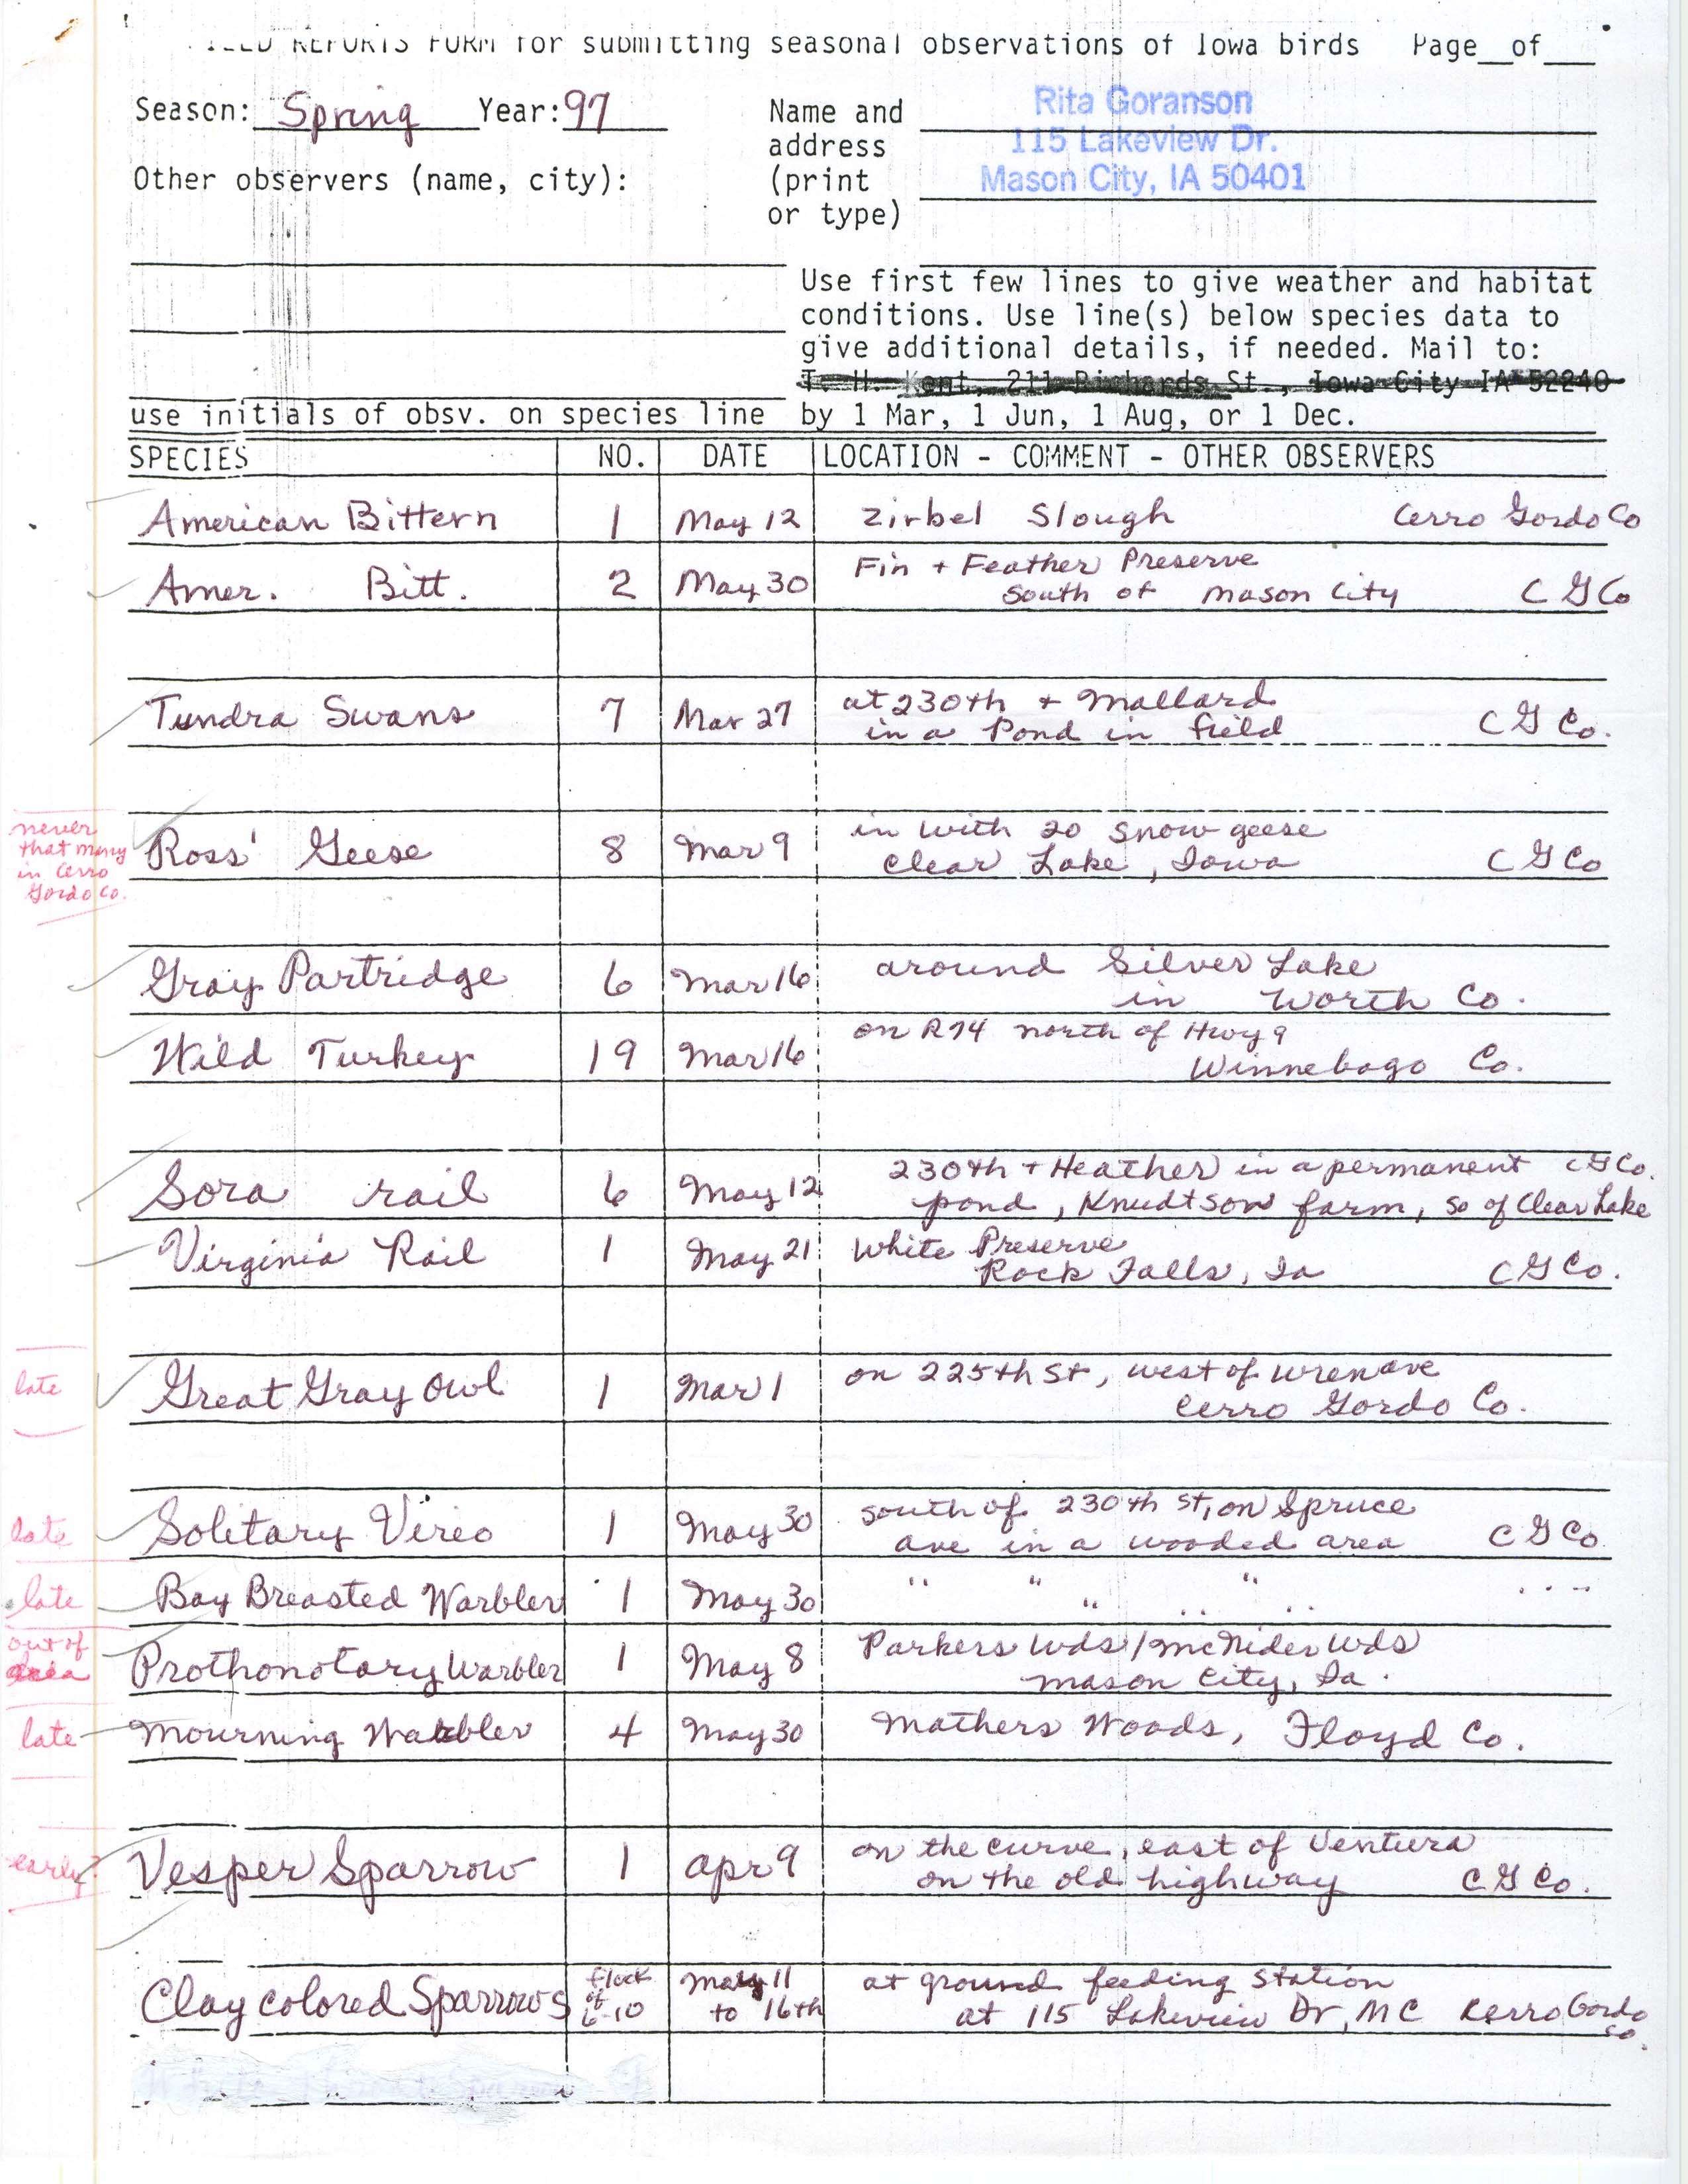 Field reports form for submitting seasonal observations of Iowa birds, Rita Goranson, spring 1997